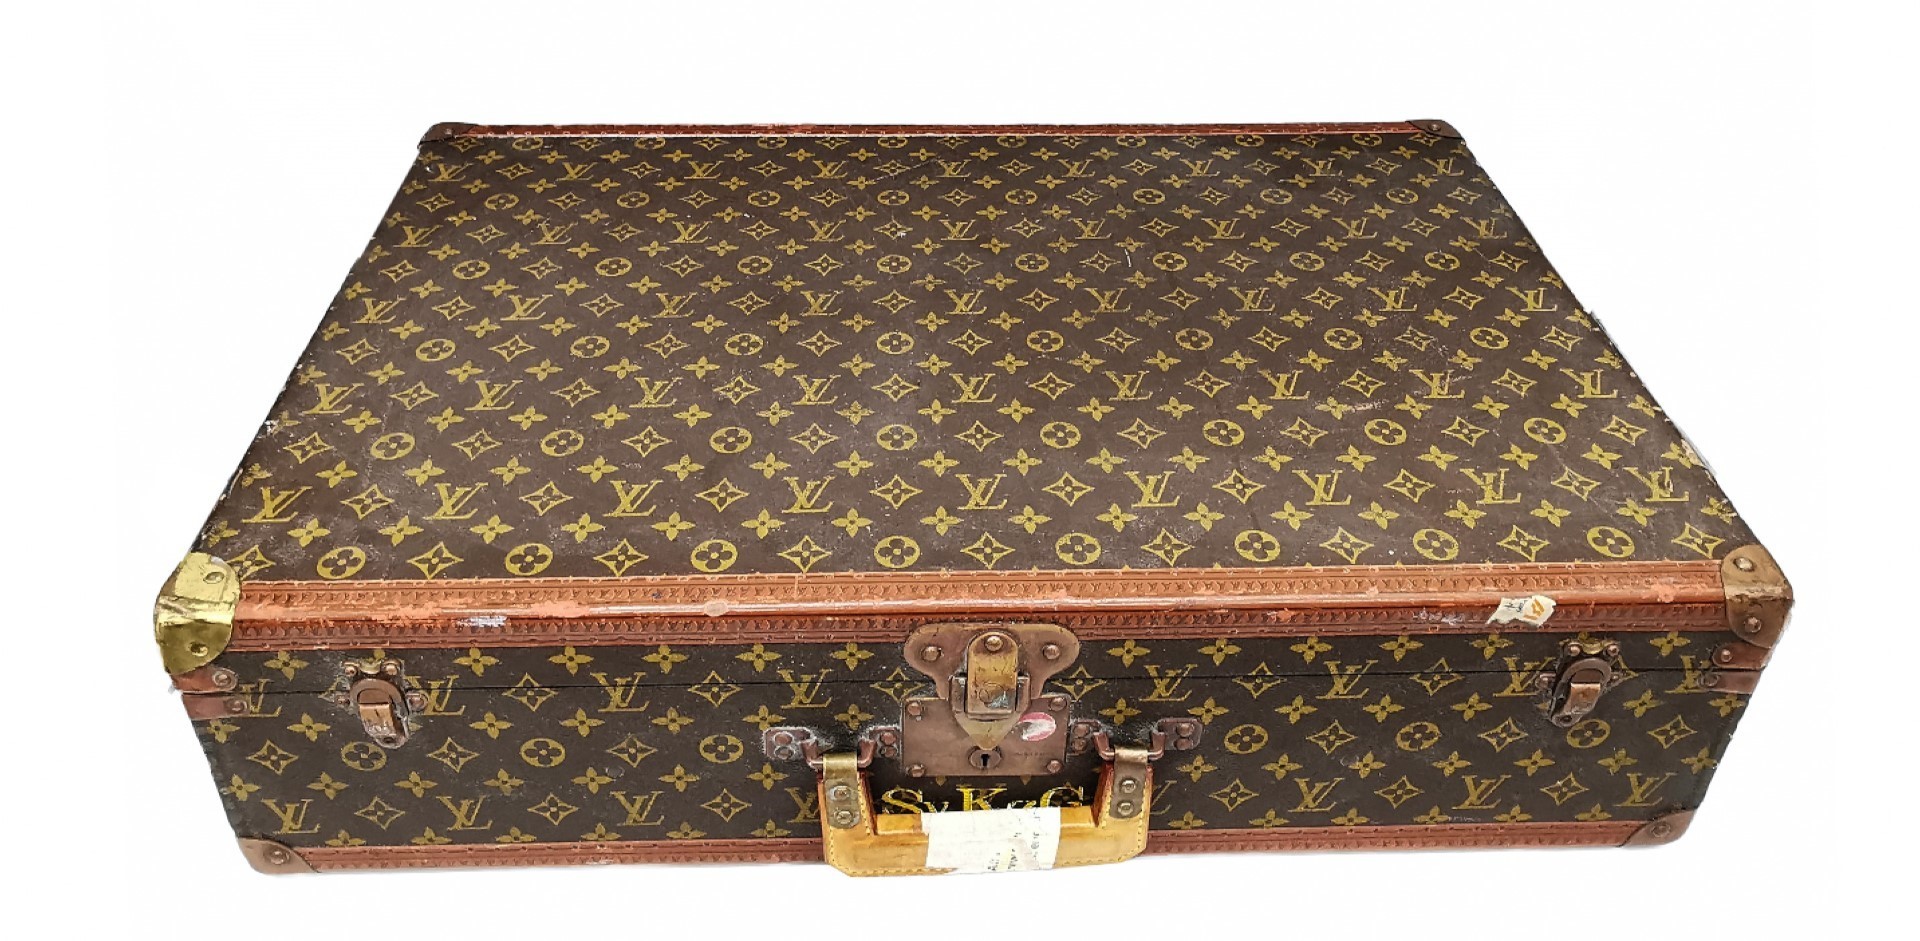 A French mid-20th century Louis Vuitton hard-sided case, the exterior finished in the famous